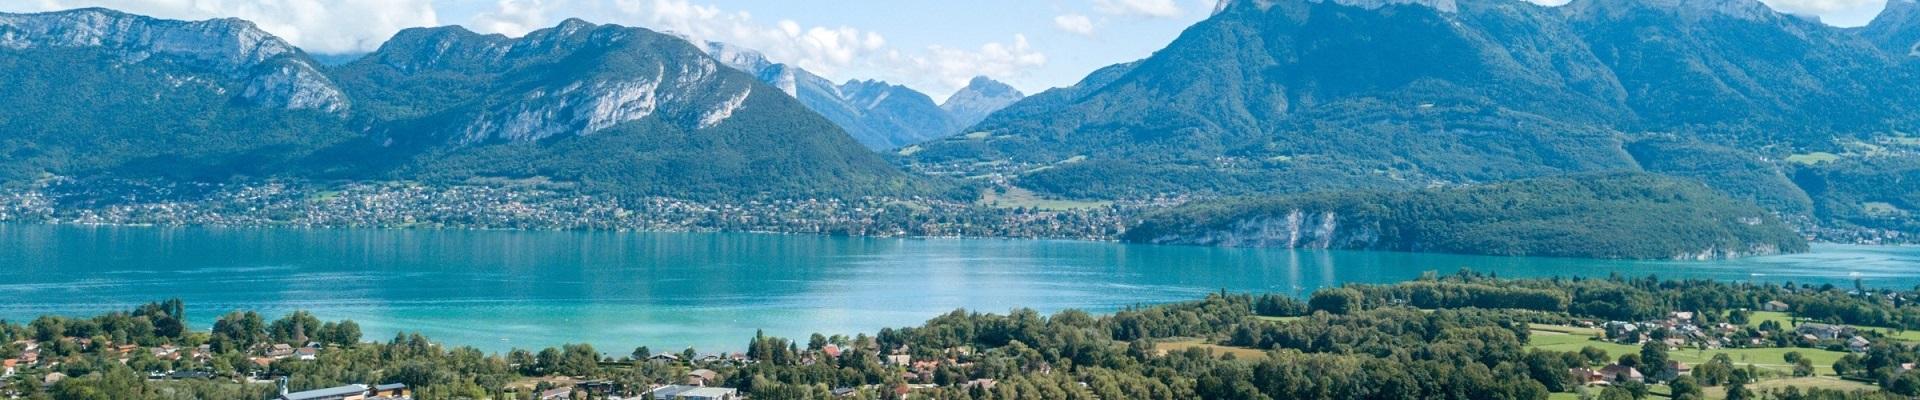 https://www.seminairesdecaractere.fr/notre-maison/takamaka-lyon-annecy-incentive-sports-outdoor-fun-glisse-seminaires-de-caractere/?portfolioCats=114%2C115%2C116%2C117%2C118%2C119%2C120%2C121%2C122%2C123%2C124%2C125%2C57%2C58%2C59%2C60%2C61%2C62%2C63%2C64%2C65